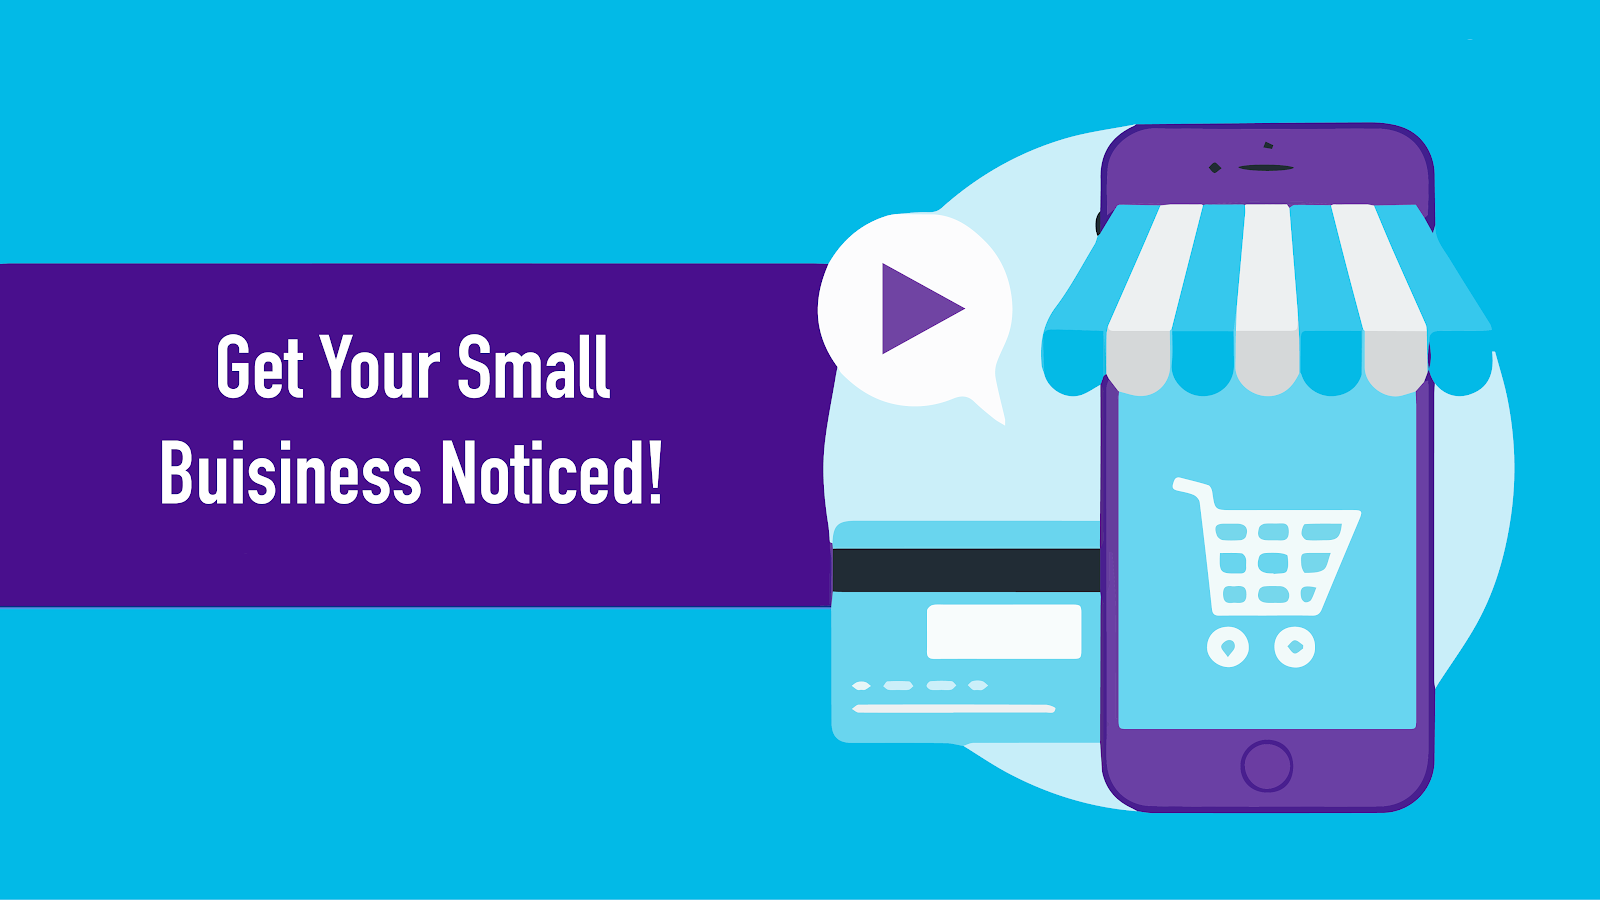 Get your small business noticed